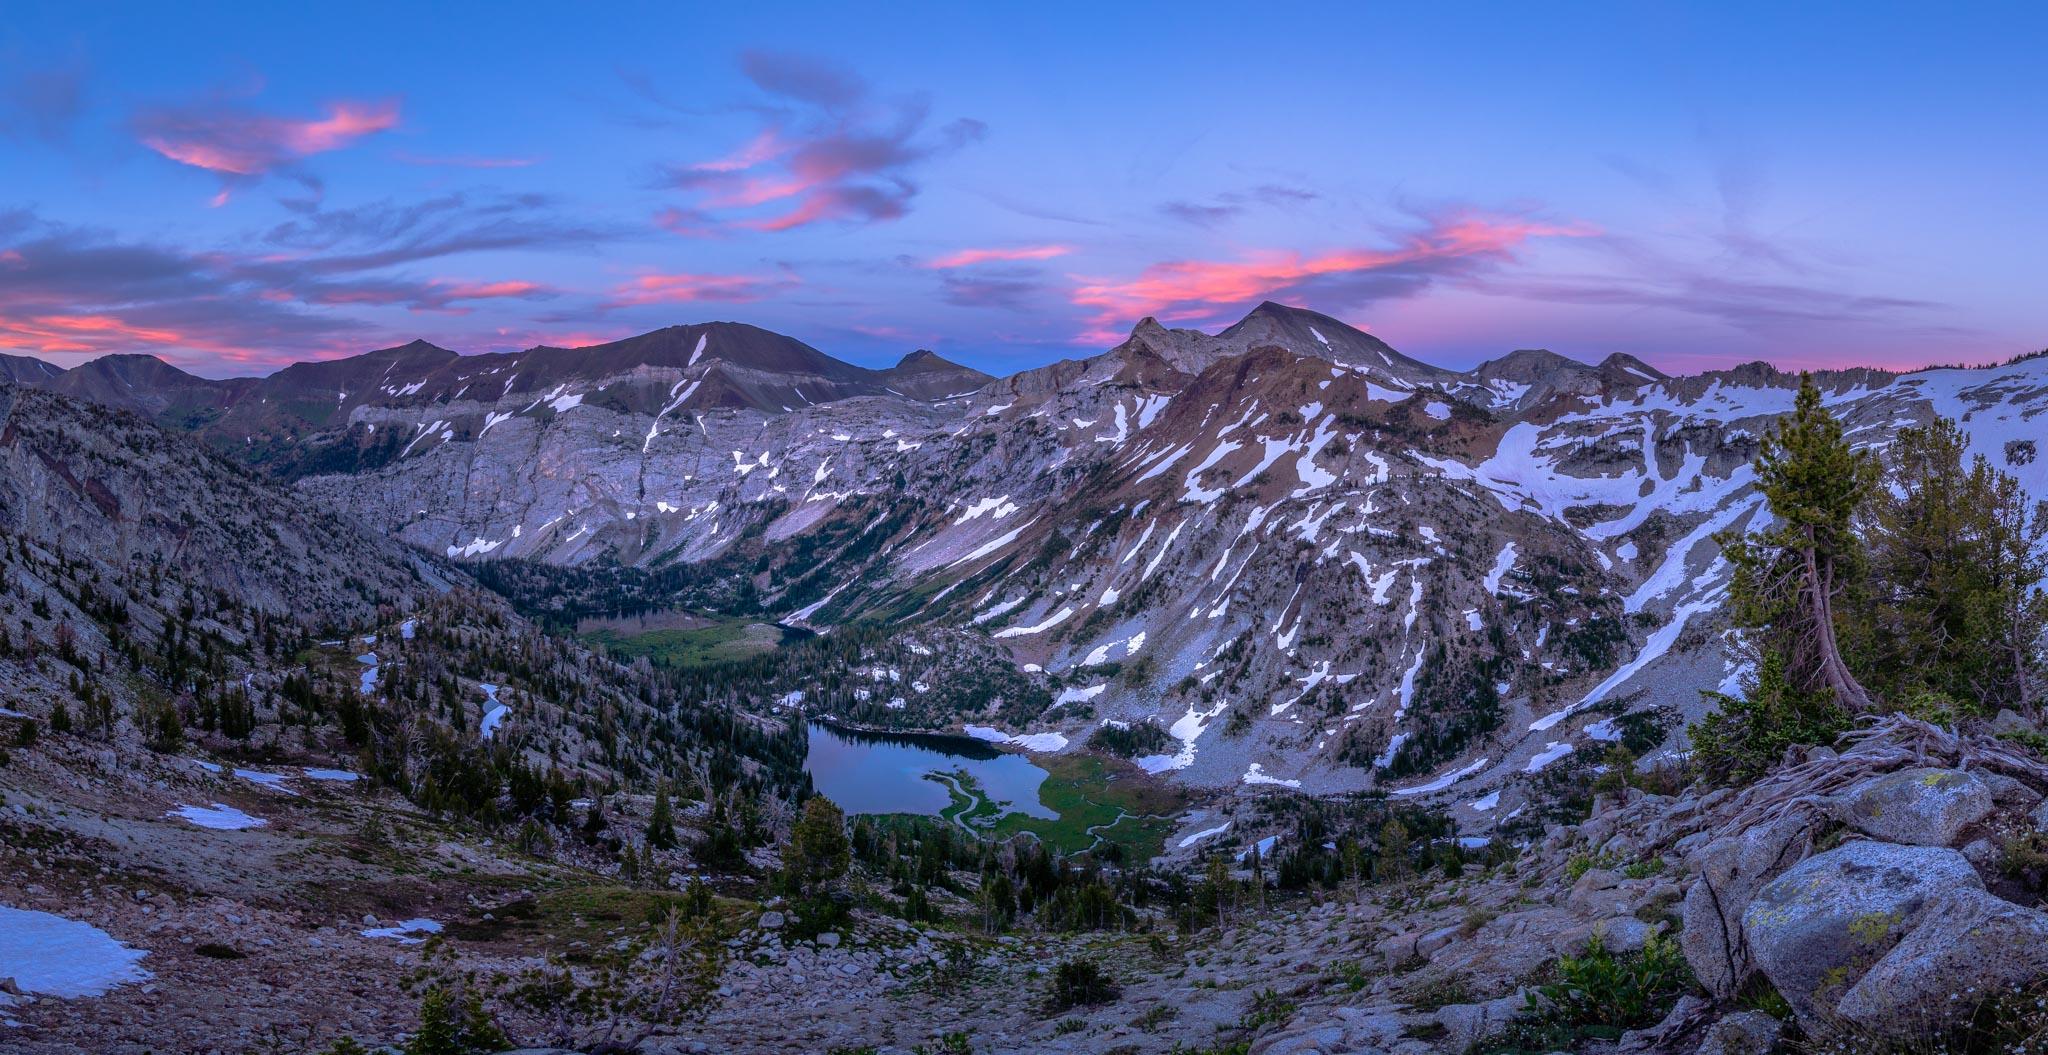 Pink clouds above Frazier Lake and the Valley below